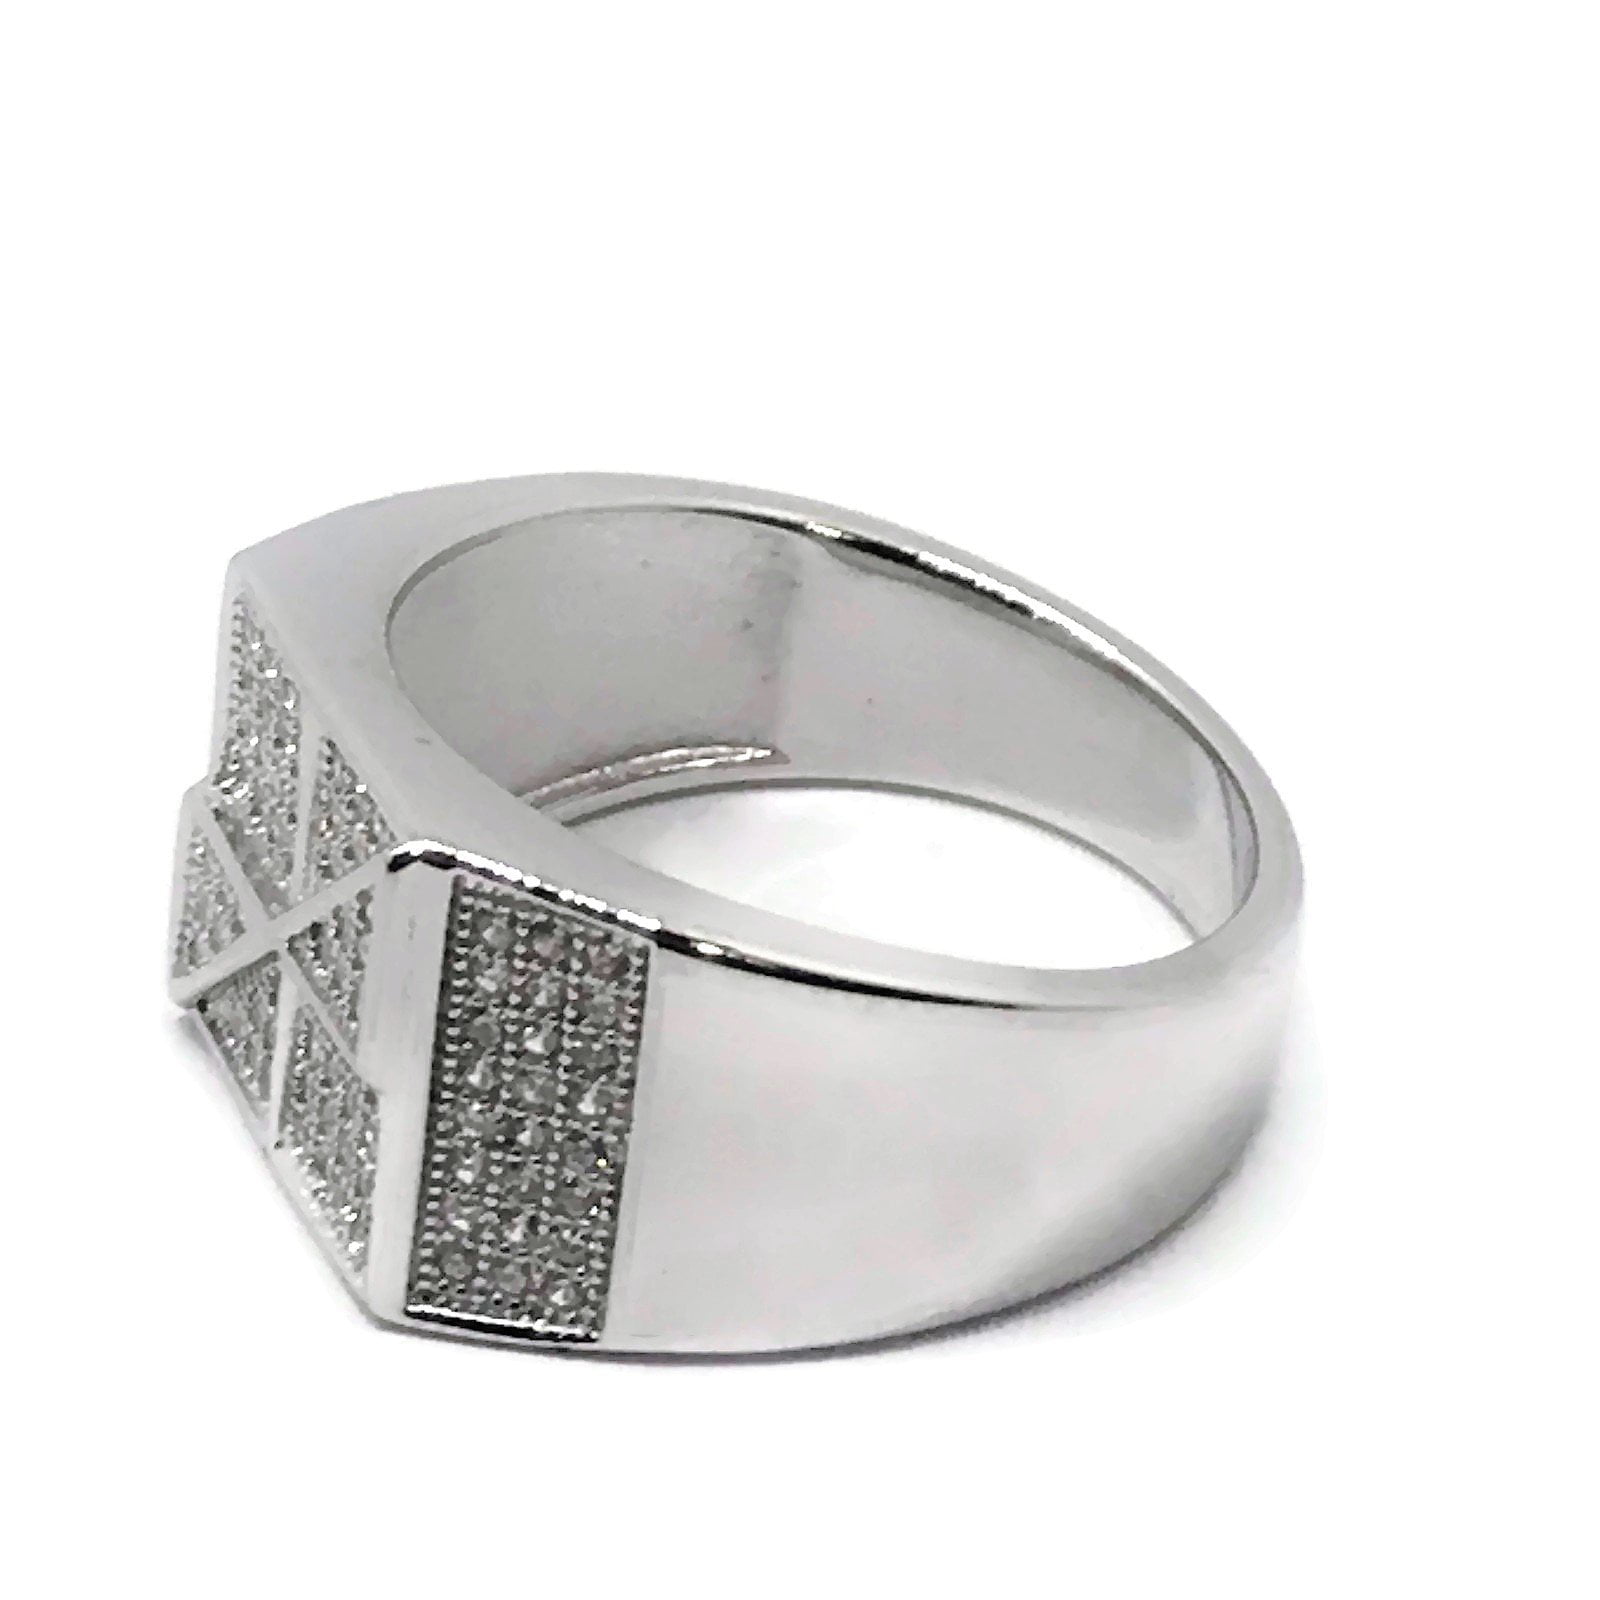 Details about   Brand NEW Mens Stainless Steel Ring Sizes 10 & 11 Available weight 6.0 grams